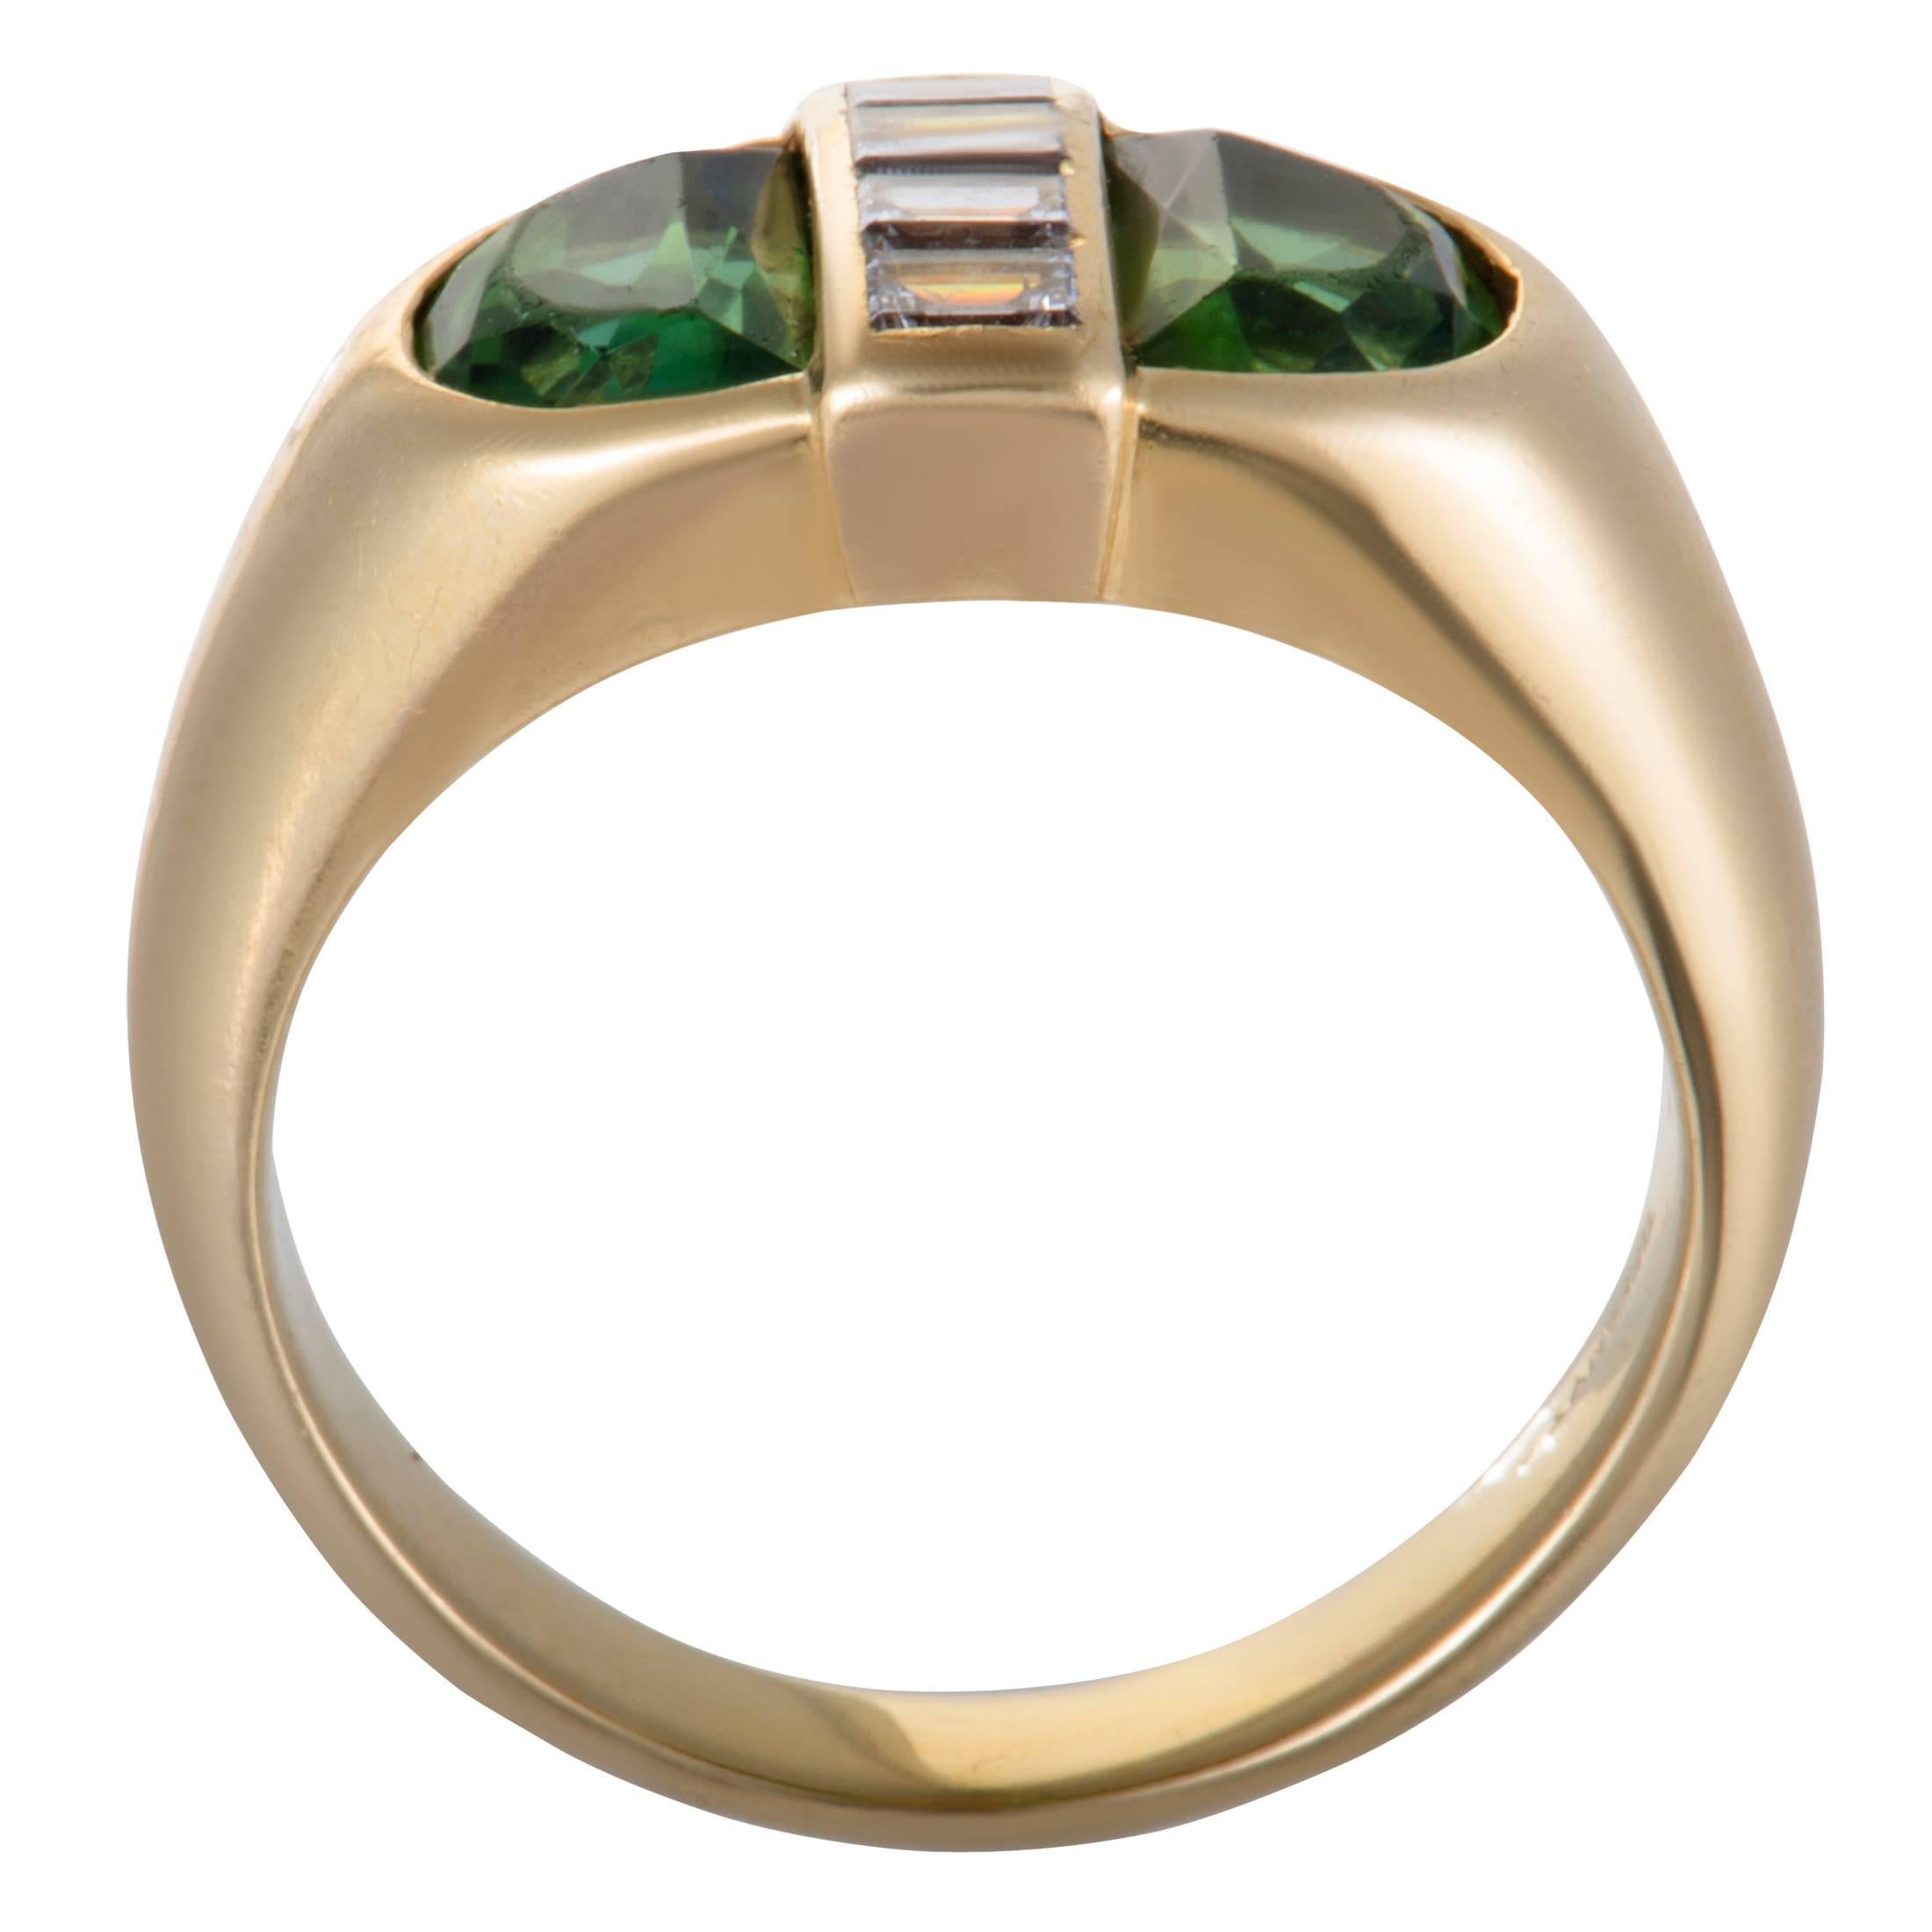 This beautiful ring by Tiffany & Co. is a spectacular blend of shimmering 18K yellow gold and a stunning design. The incredible ring includes 0.35ct of sparkling diamonds and spectacular green peridot stones in its gorgeous design that enhance the